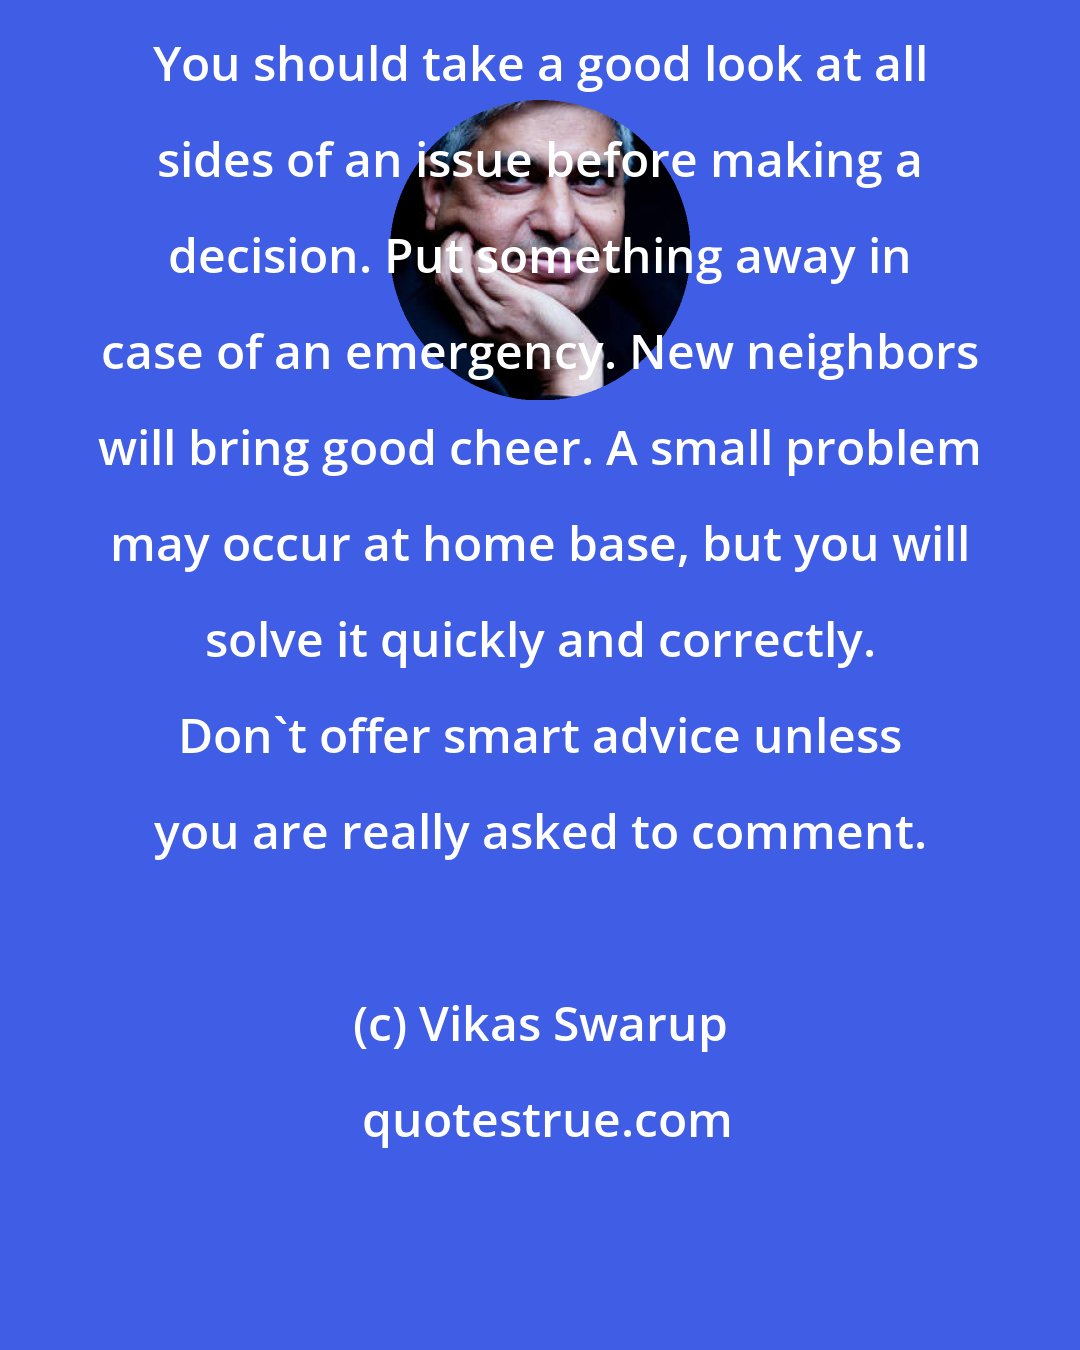 Vikas Swarup: You should take a good look at all sides of an issue before making a decision. Put something away in case of an emergency. New neighbors will bring good cheer. A small problem may occur at home base, but you will solve it quickly and correctly. Don't offer smart advice unless you are really asked to comment.